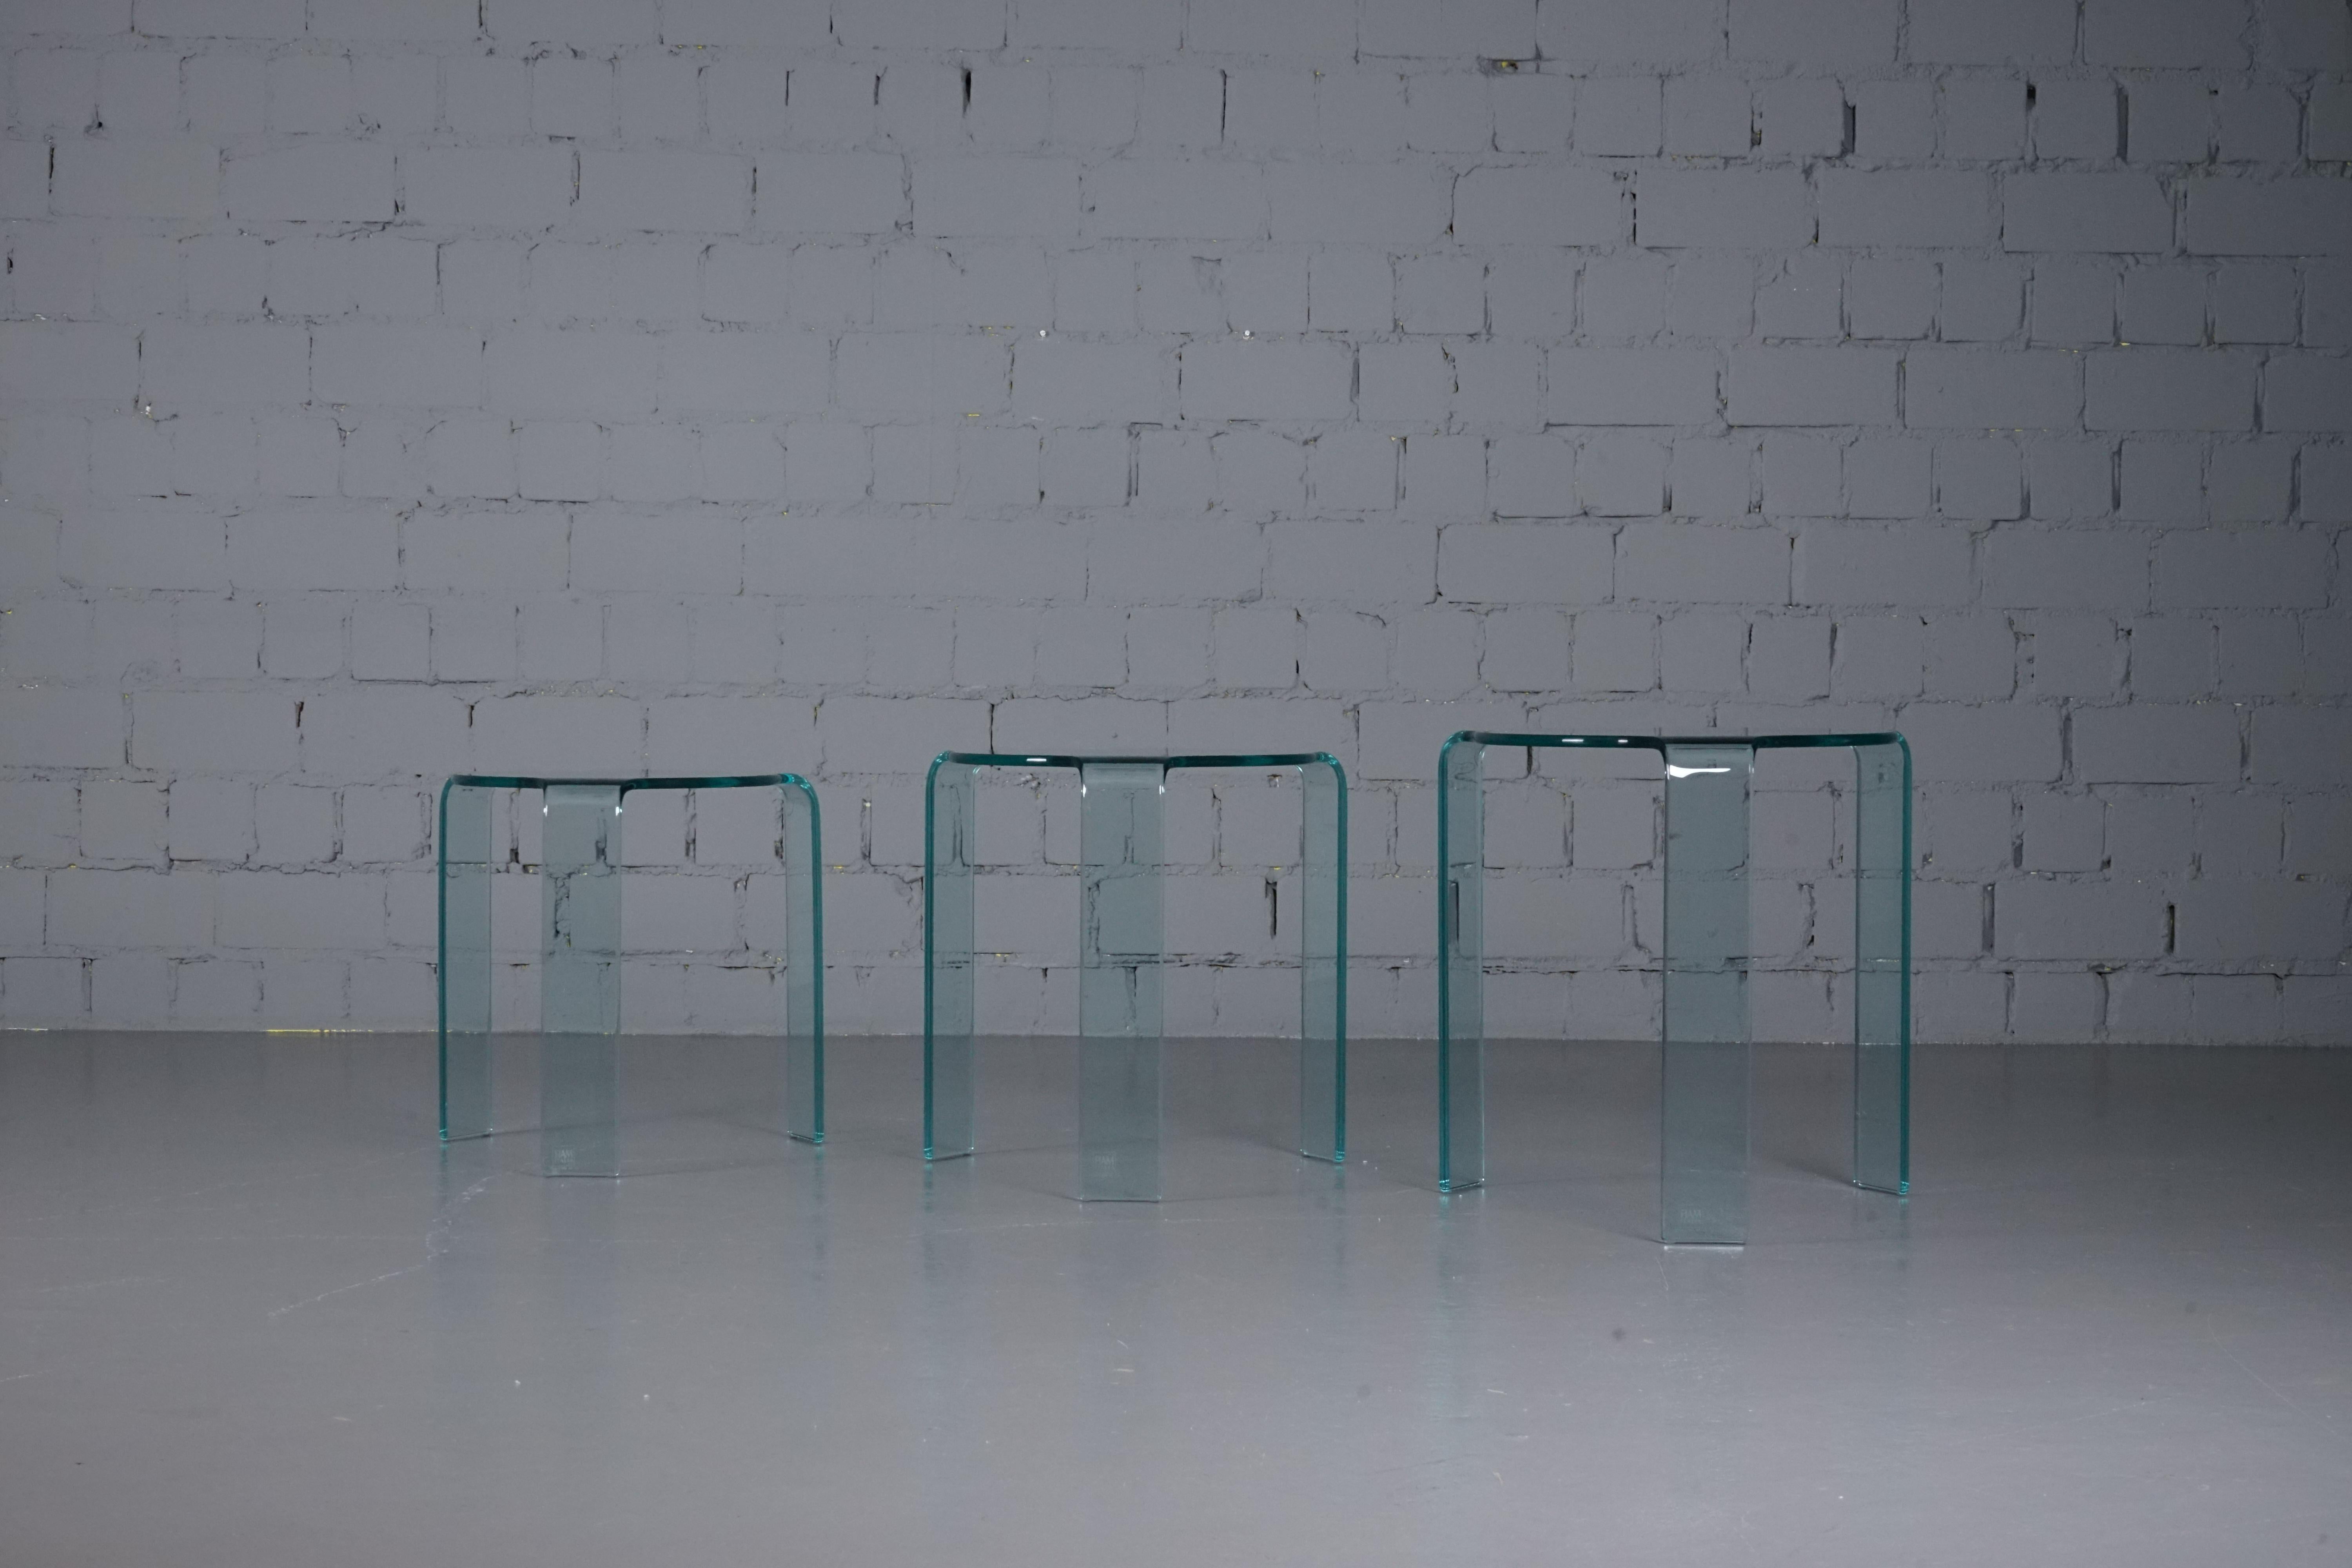 This nesting tables are a homage to  Finnish architect and designer Alvar Aalto (1898-1976). Manufactured by Fiam in Italy. Instead of wood, these tables are made of curved glass. A timelessly beautiful classic. 

A set of these tables are in the